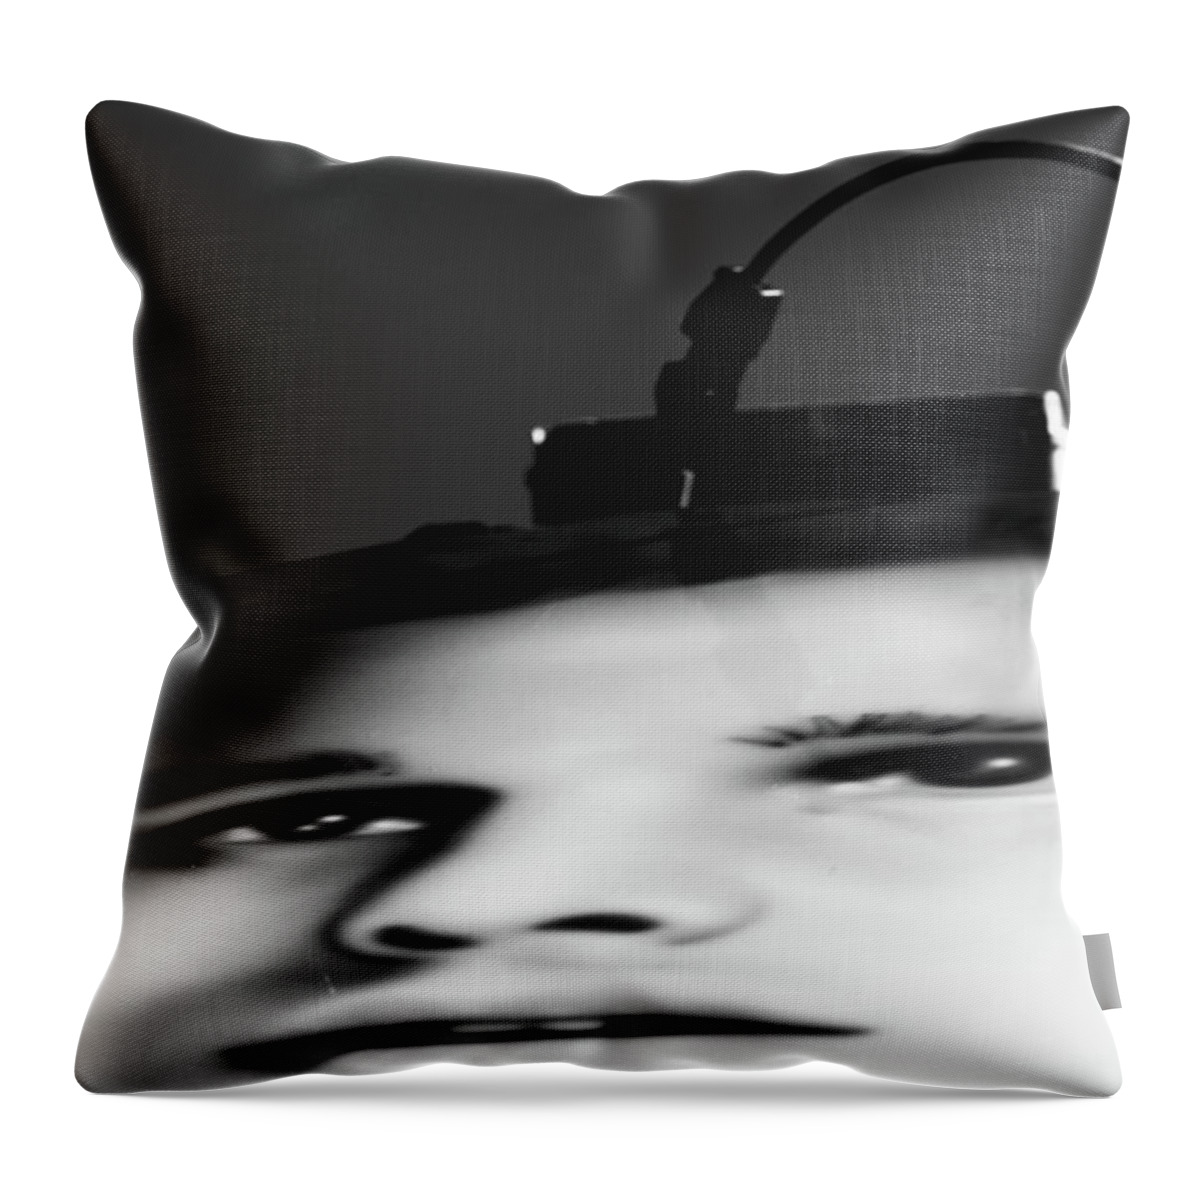 Lister Park Throw Pillow featuring the photograph Perturbed Life by Jez C Self